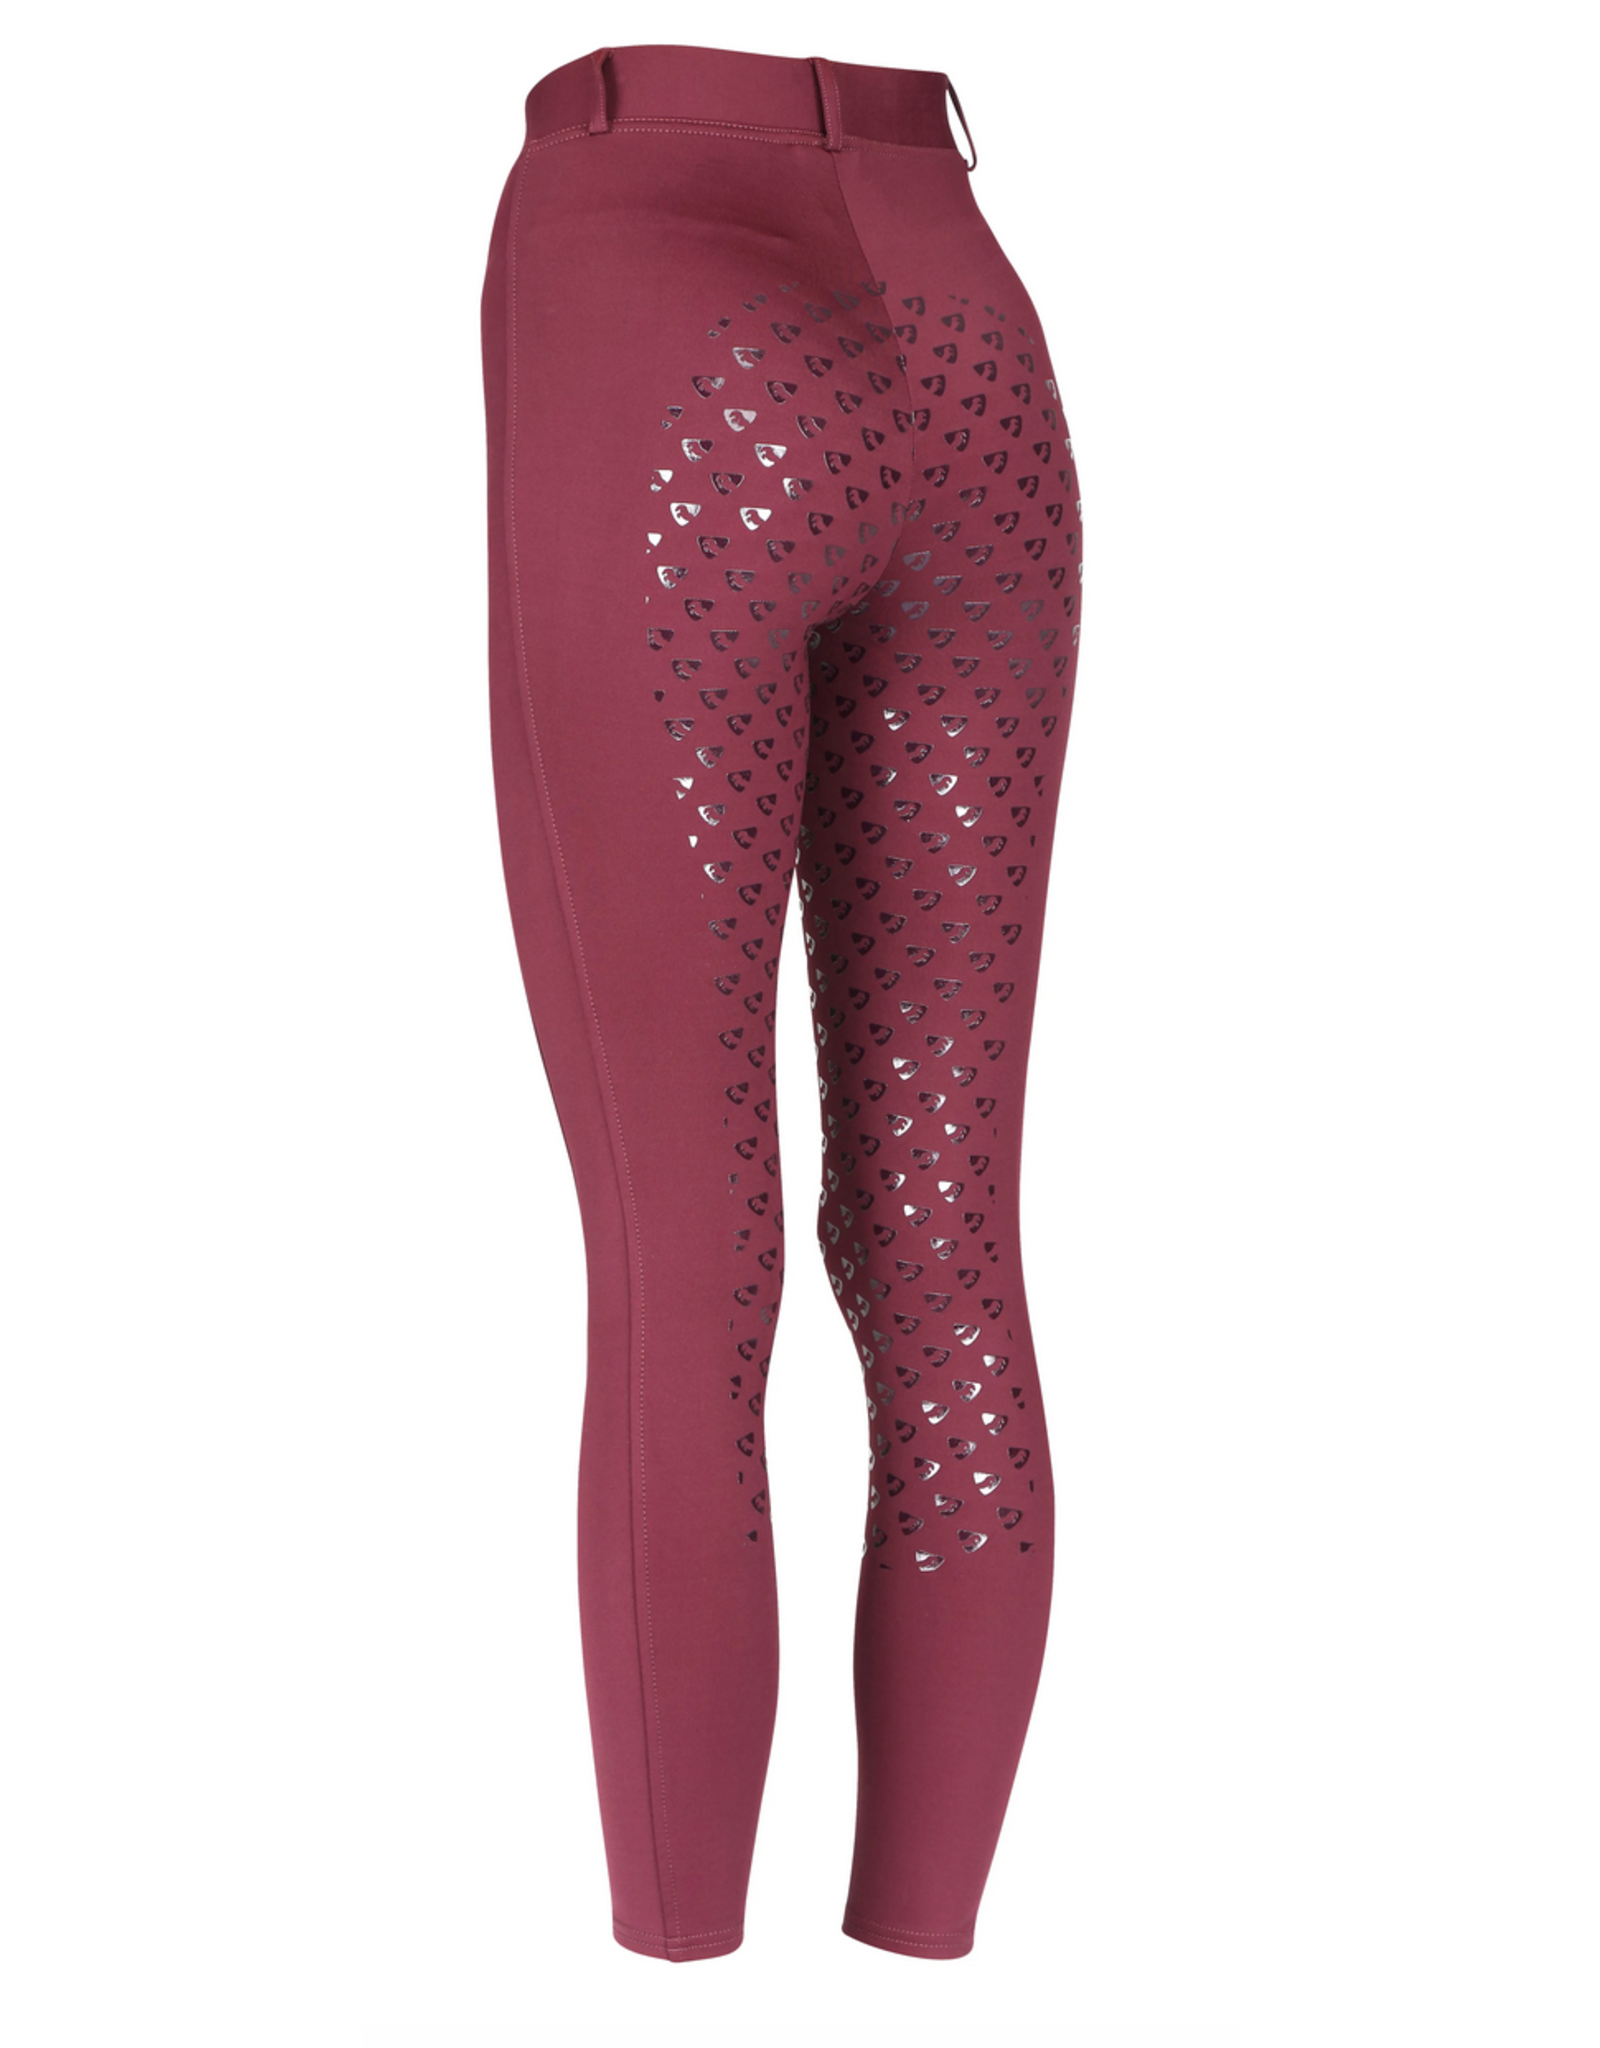 Aubrion Albany Youth Riding Tights Black Cherry